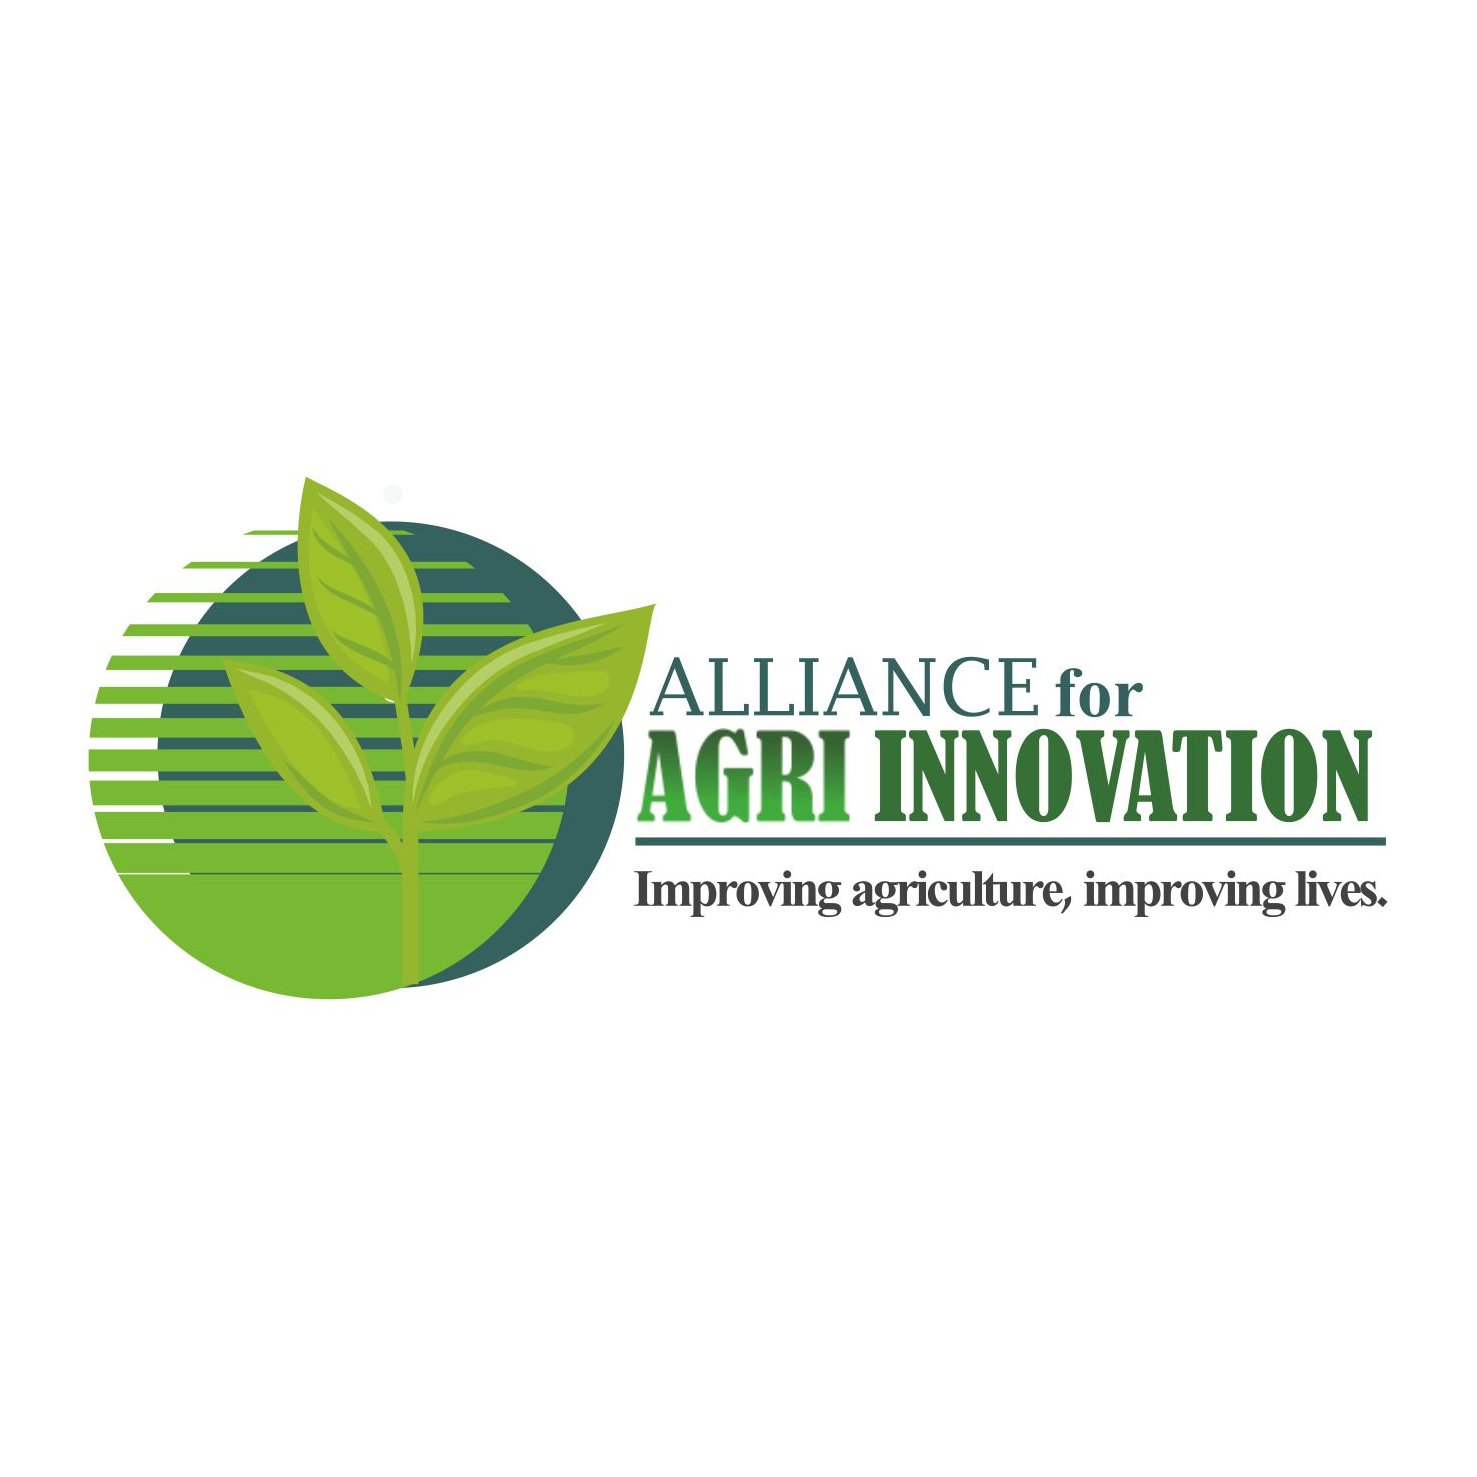 Leading agri-tech body working towards accelerating agriculture growth  by promoting new and emerging technologies for the benefits of farmers and people